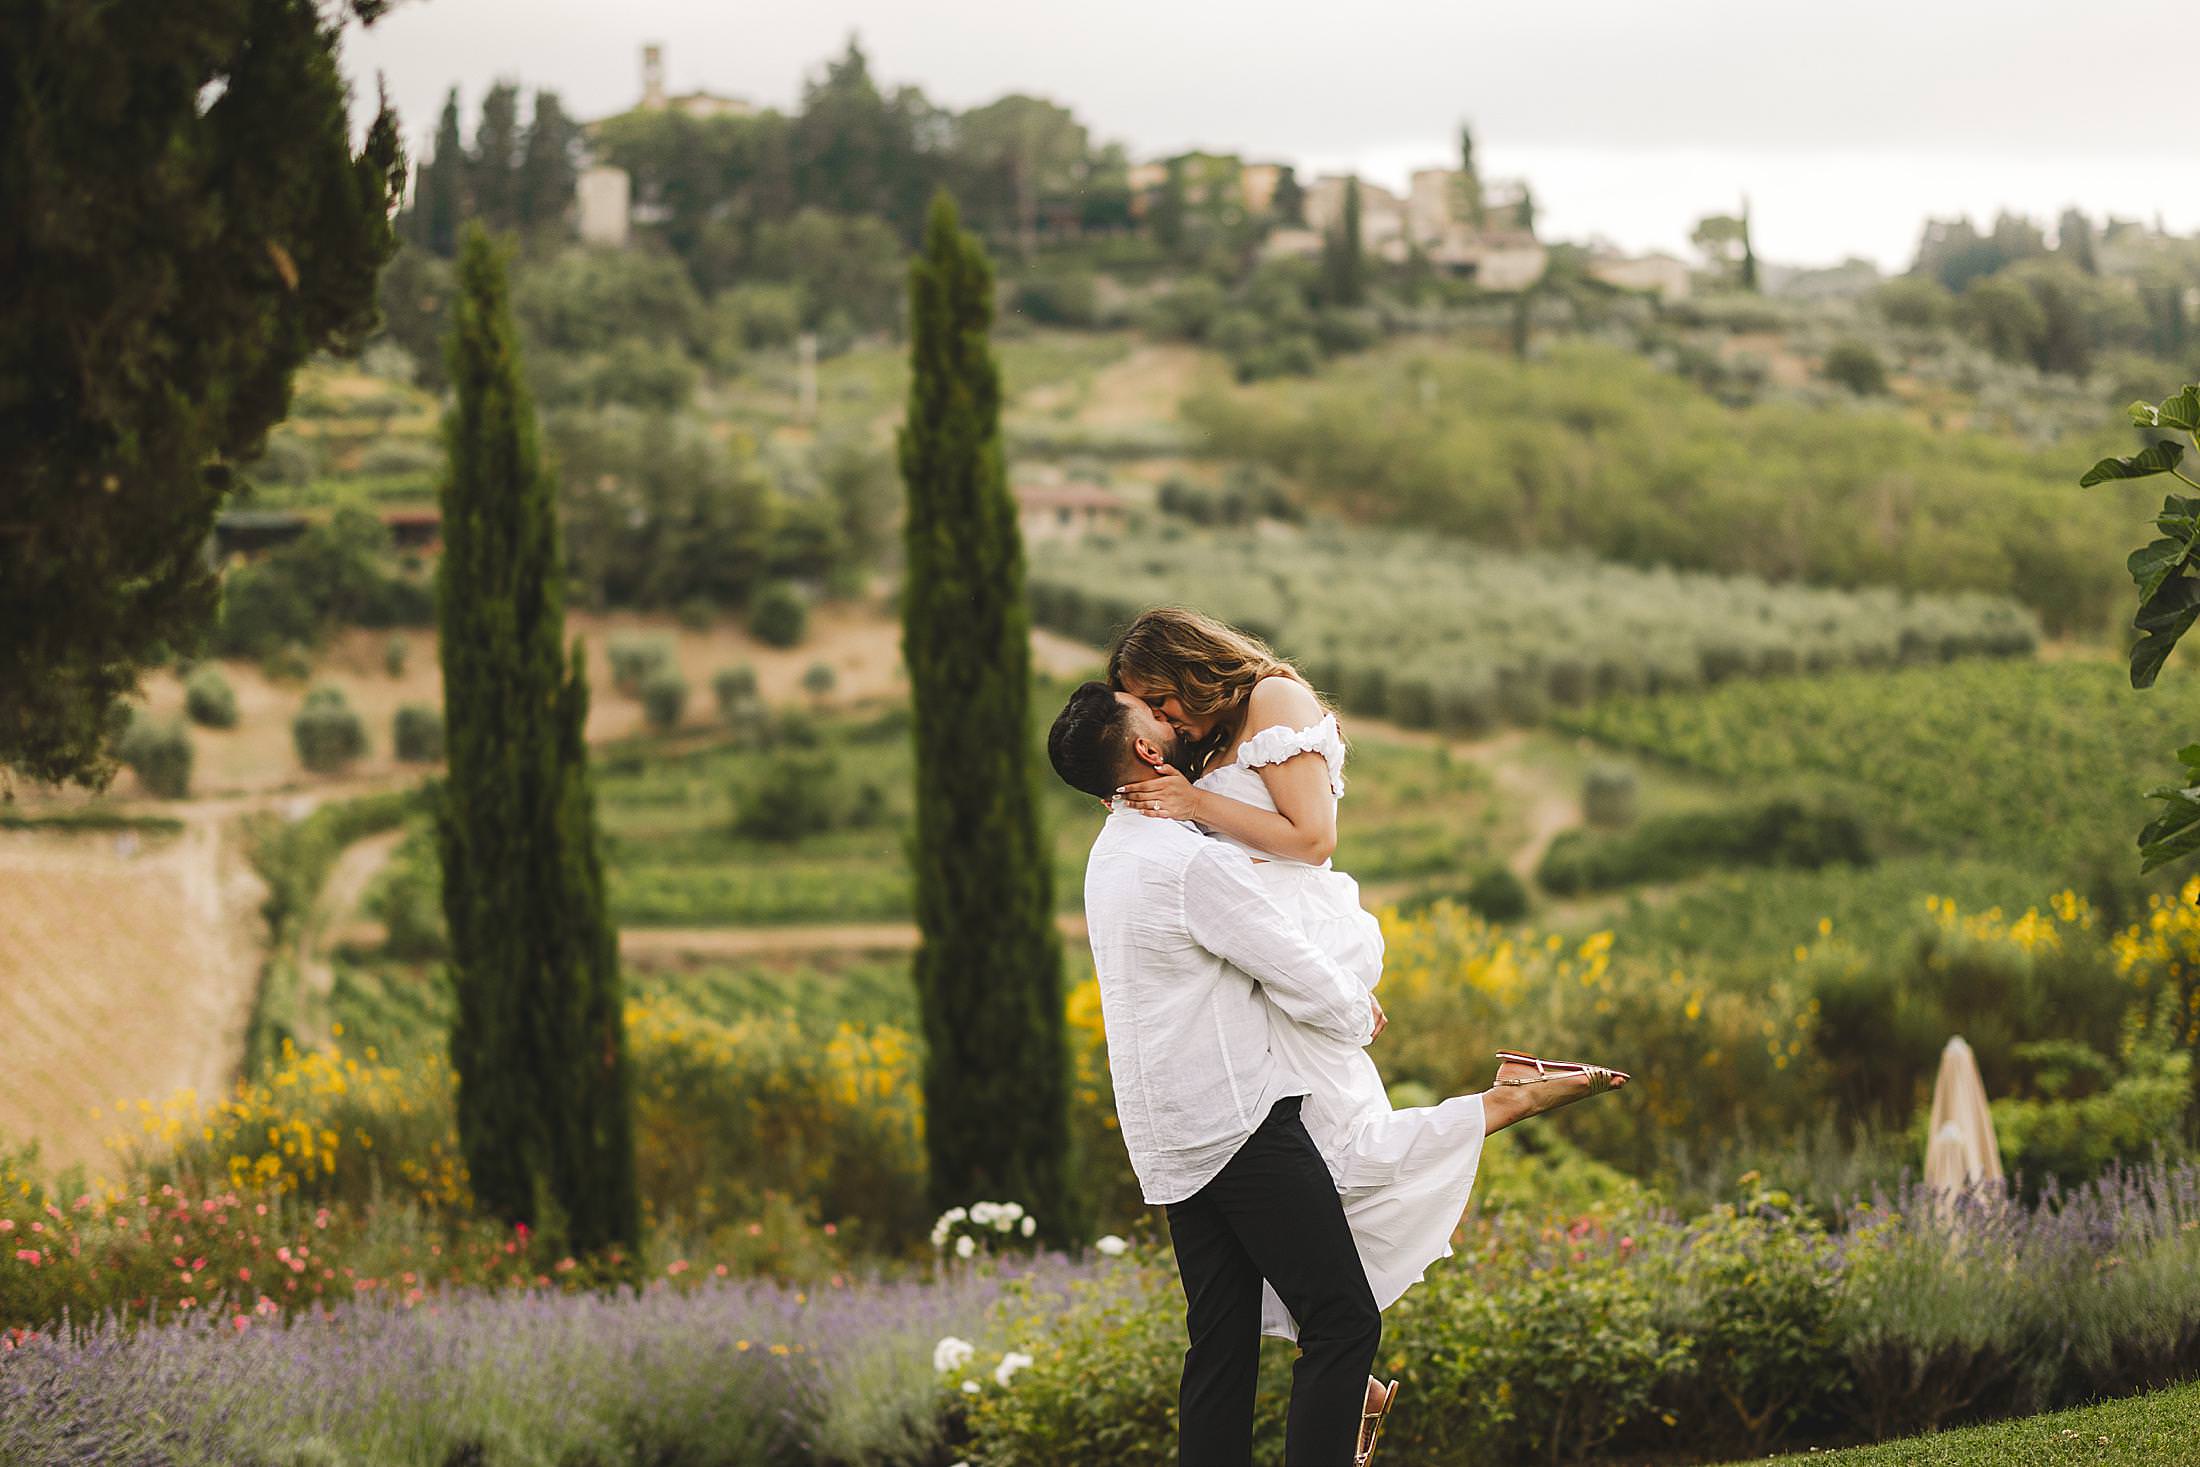 Exclusive and charming secret proposal photo shoot in Chianti countryside at Borgo del Cabreo